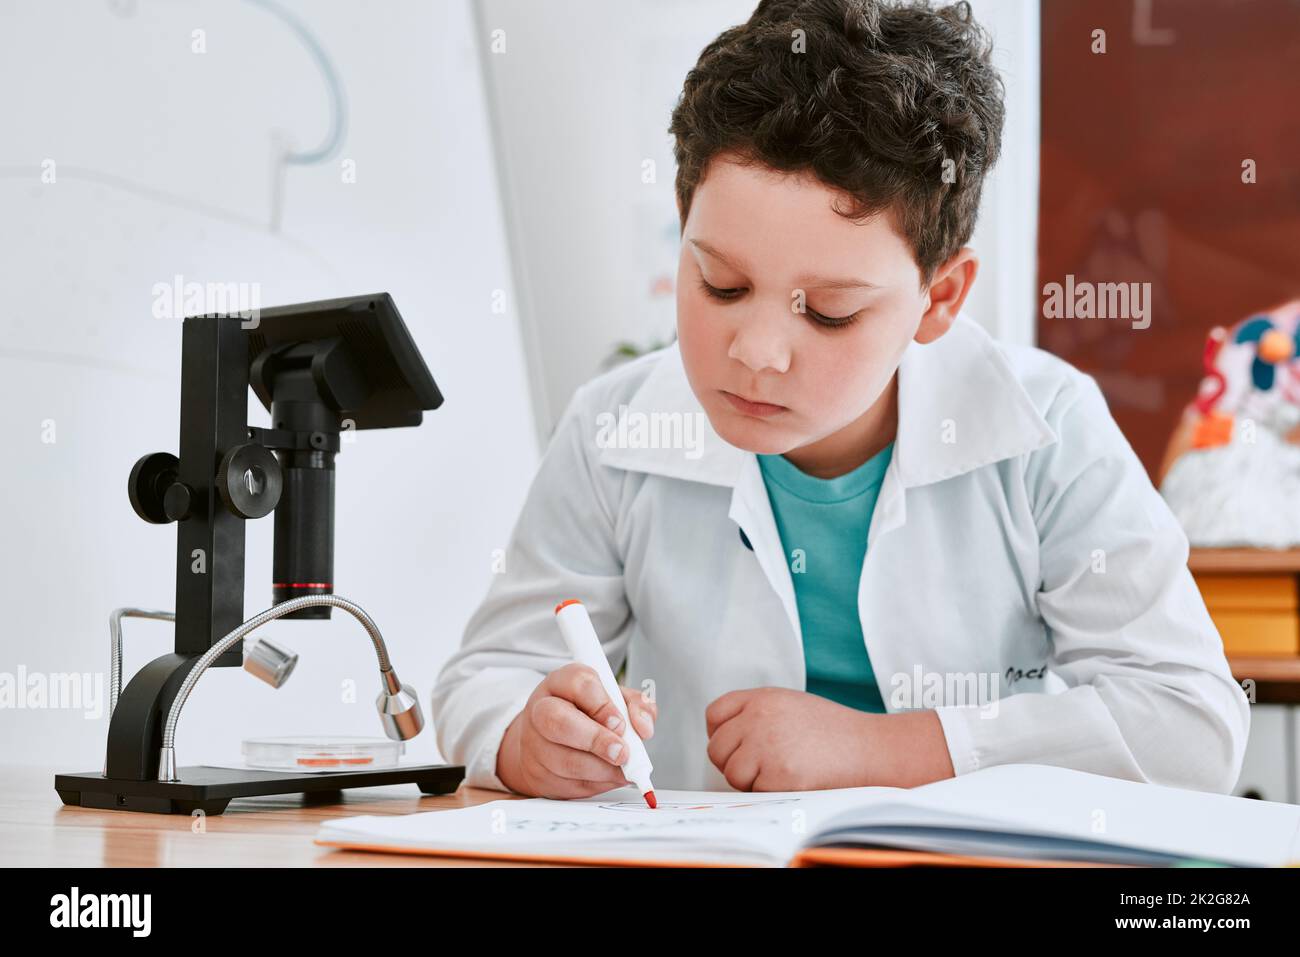 Getting top grades is what he always strives for. Shot of an adorable young school boy writing notes in his note book in science class at school. Stock Photo